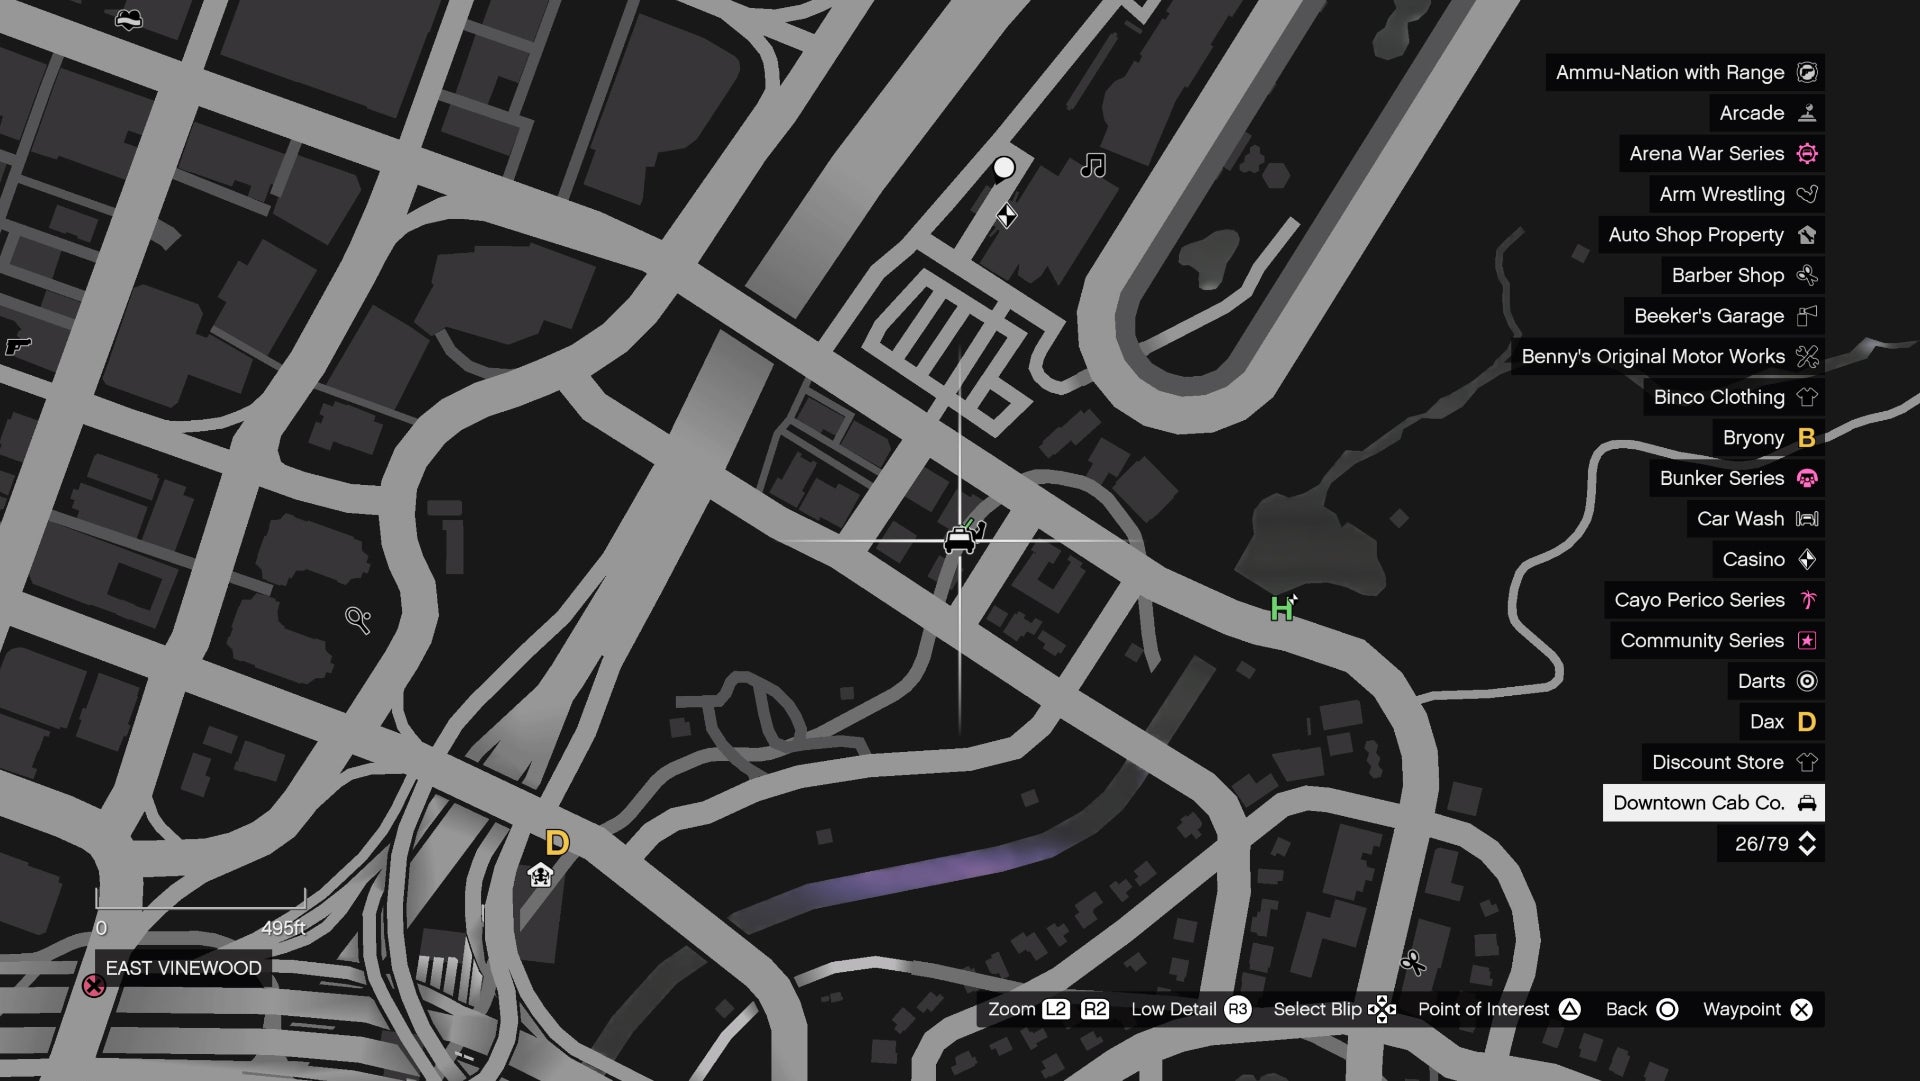 GTA Online Downtown Cab company icon marked on a map